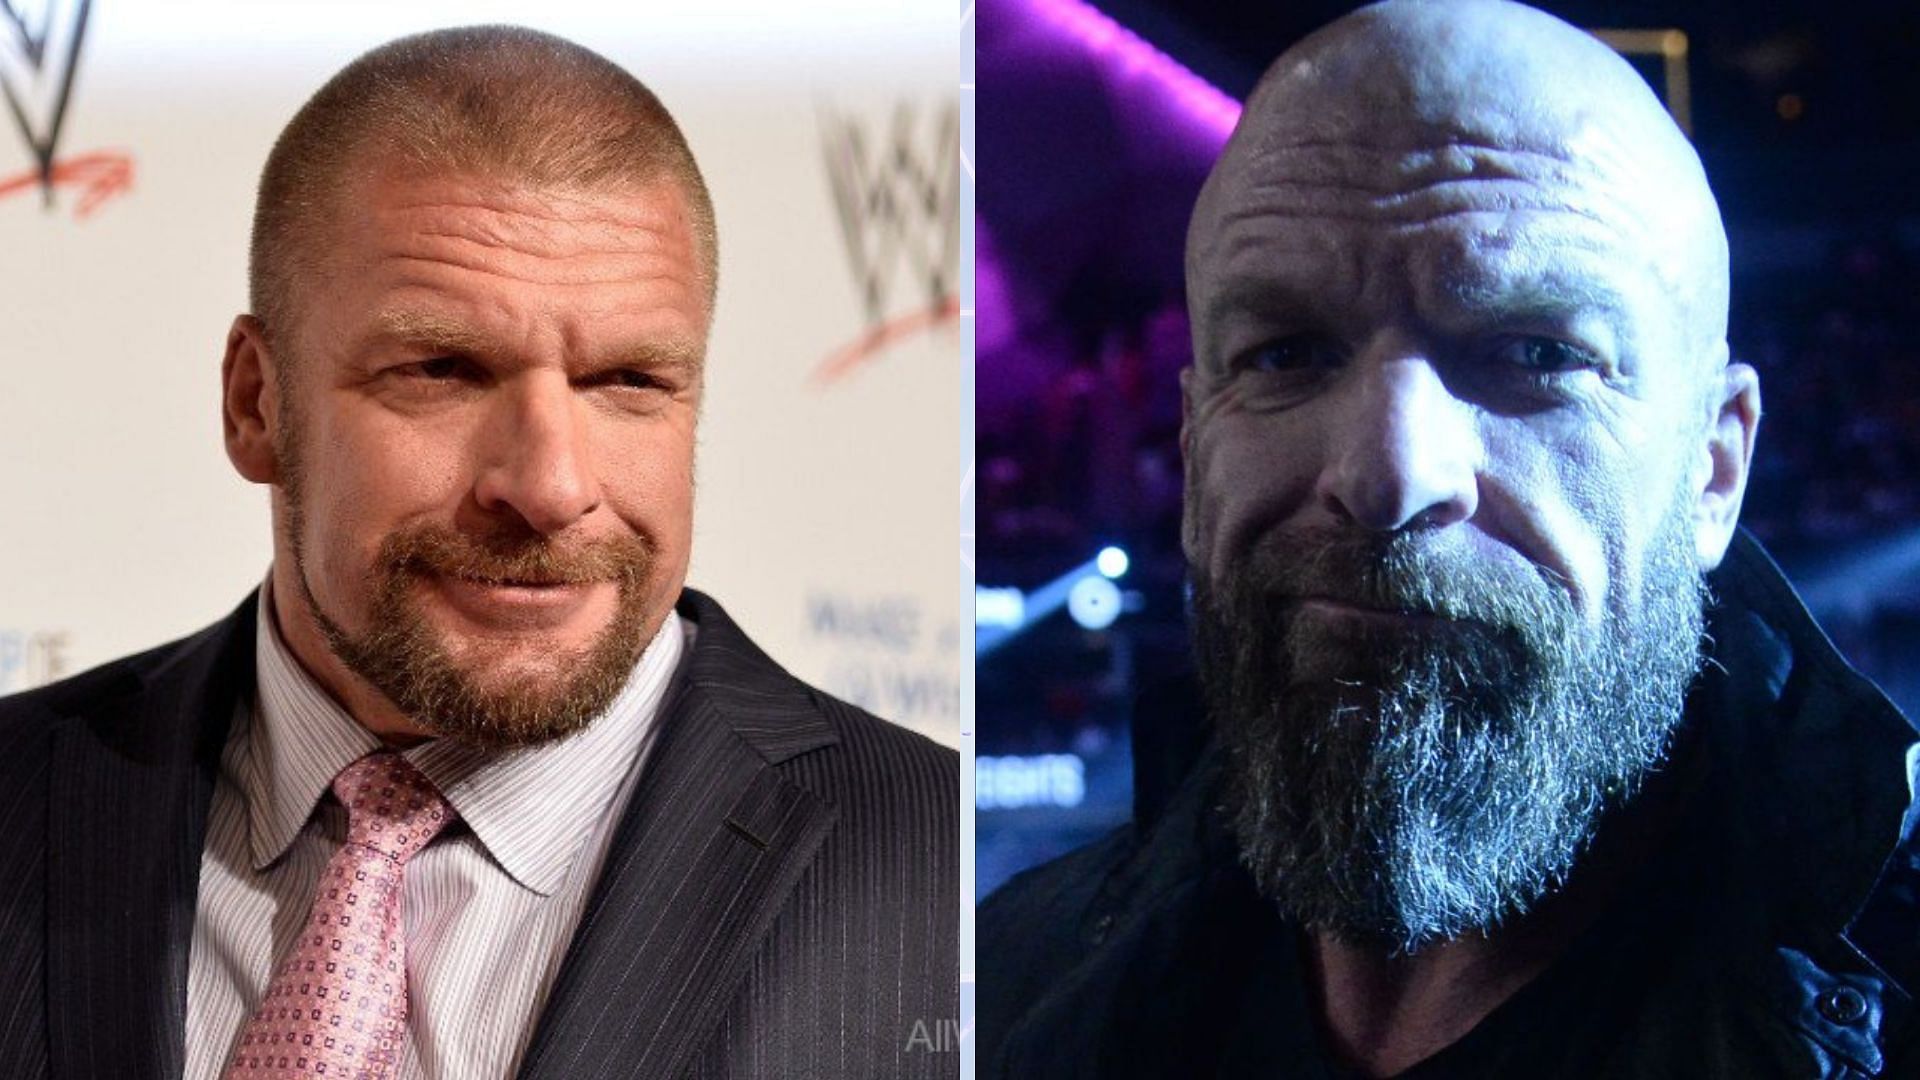 Triple H is the WWE Chief Content Officer.